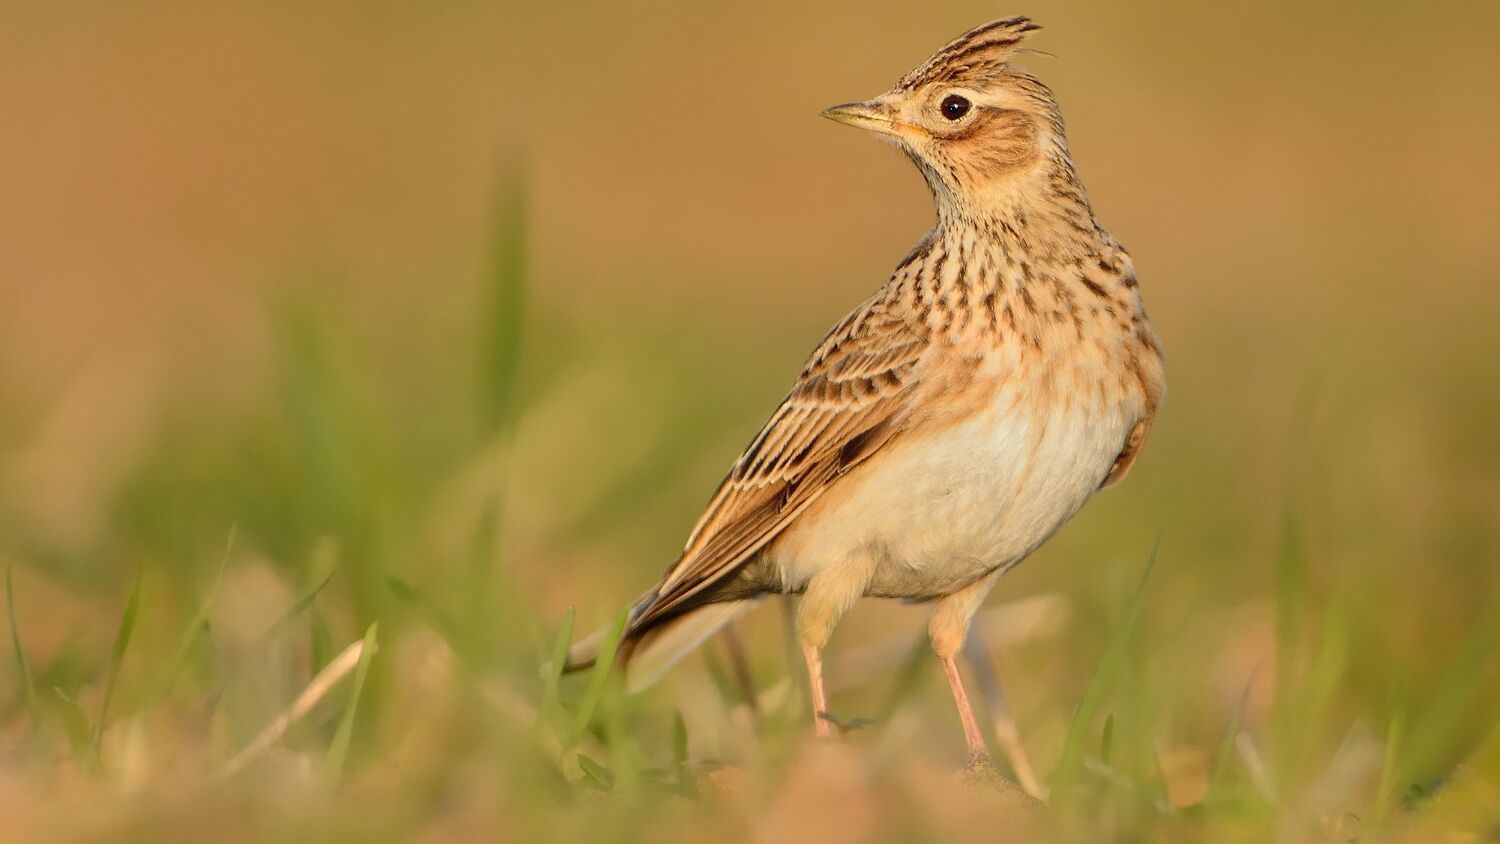 A close-up of a skylark standing in a grassy field. It has pale, golden brown feathers with a cream tummy. It has a raised crest on top of its head.